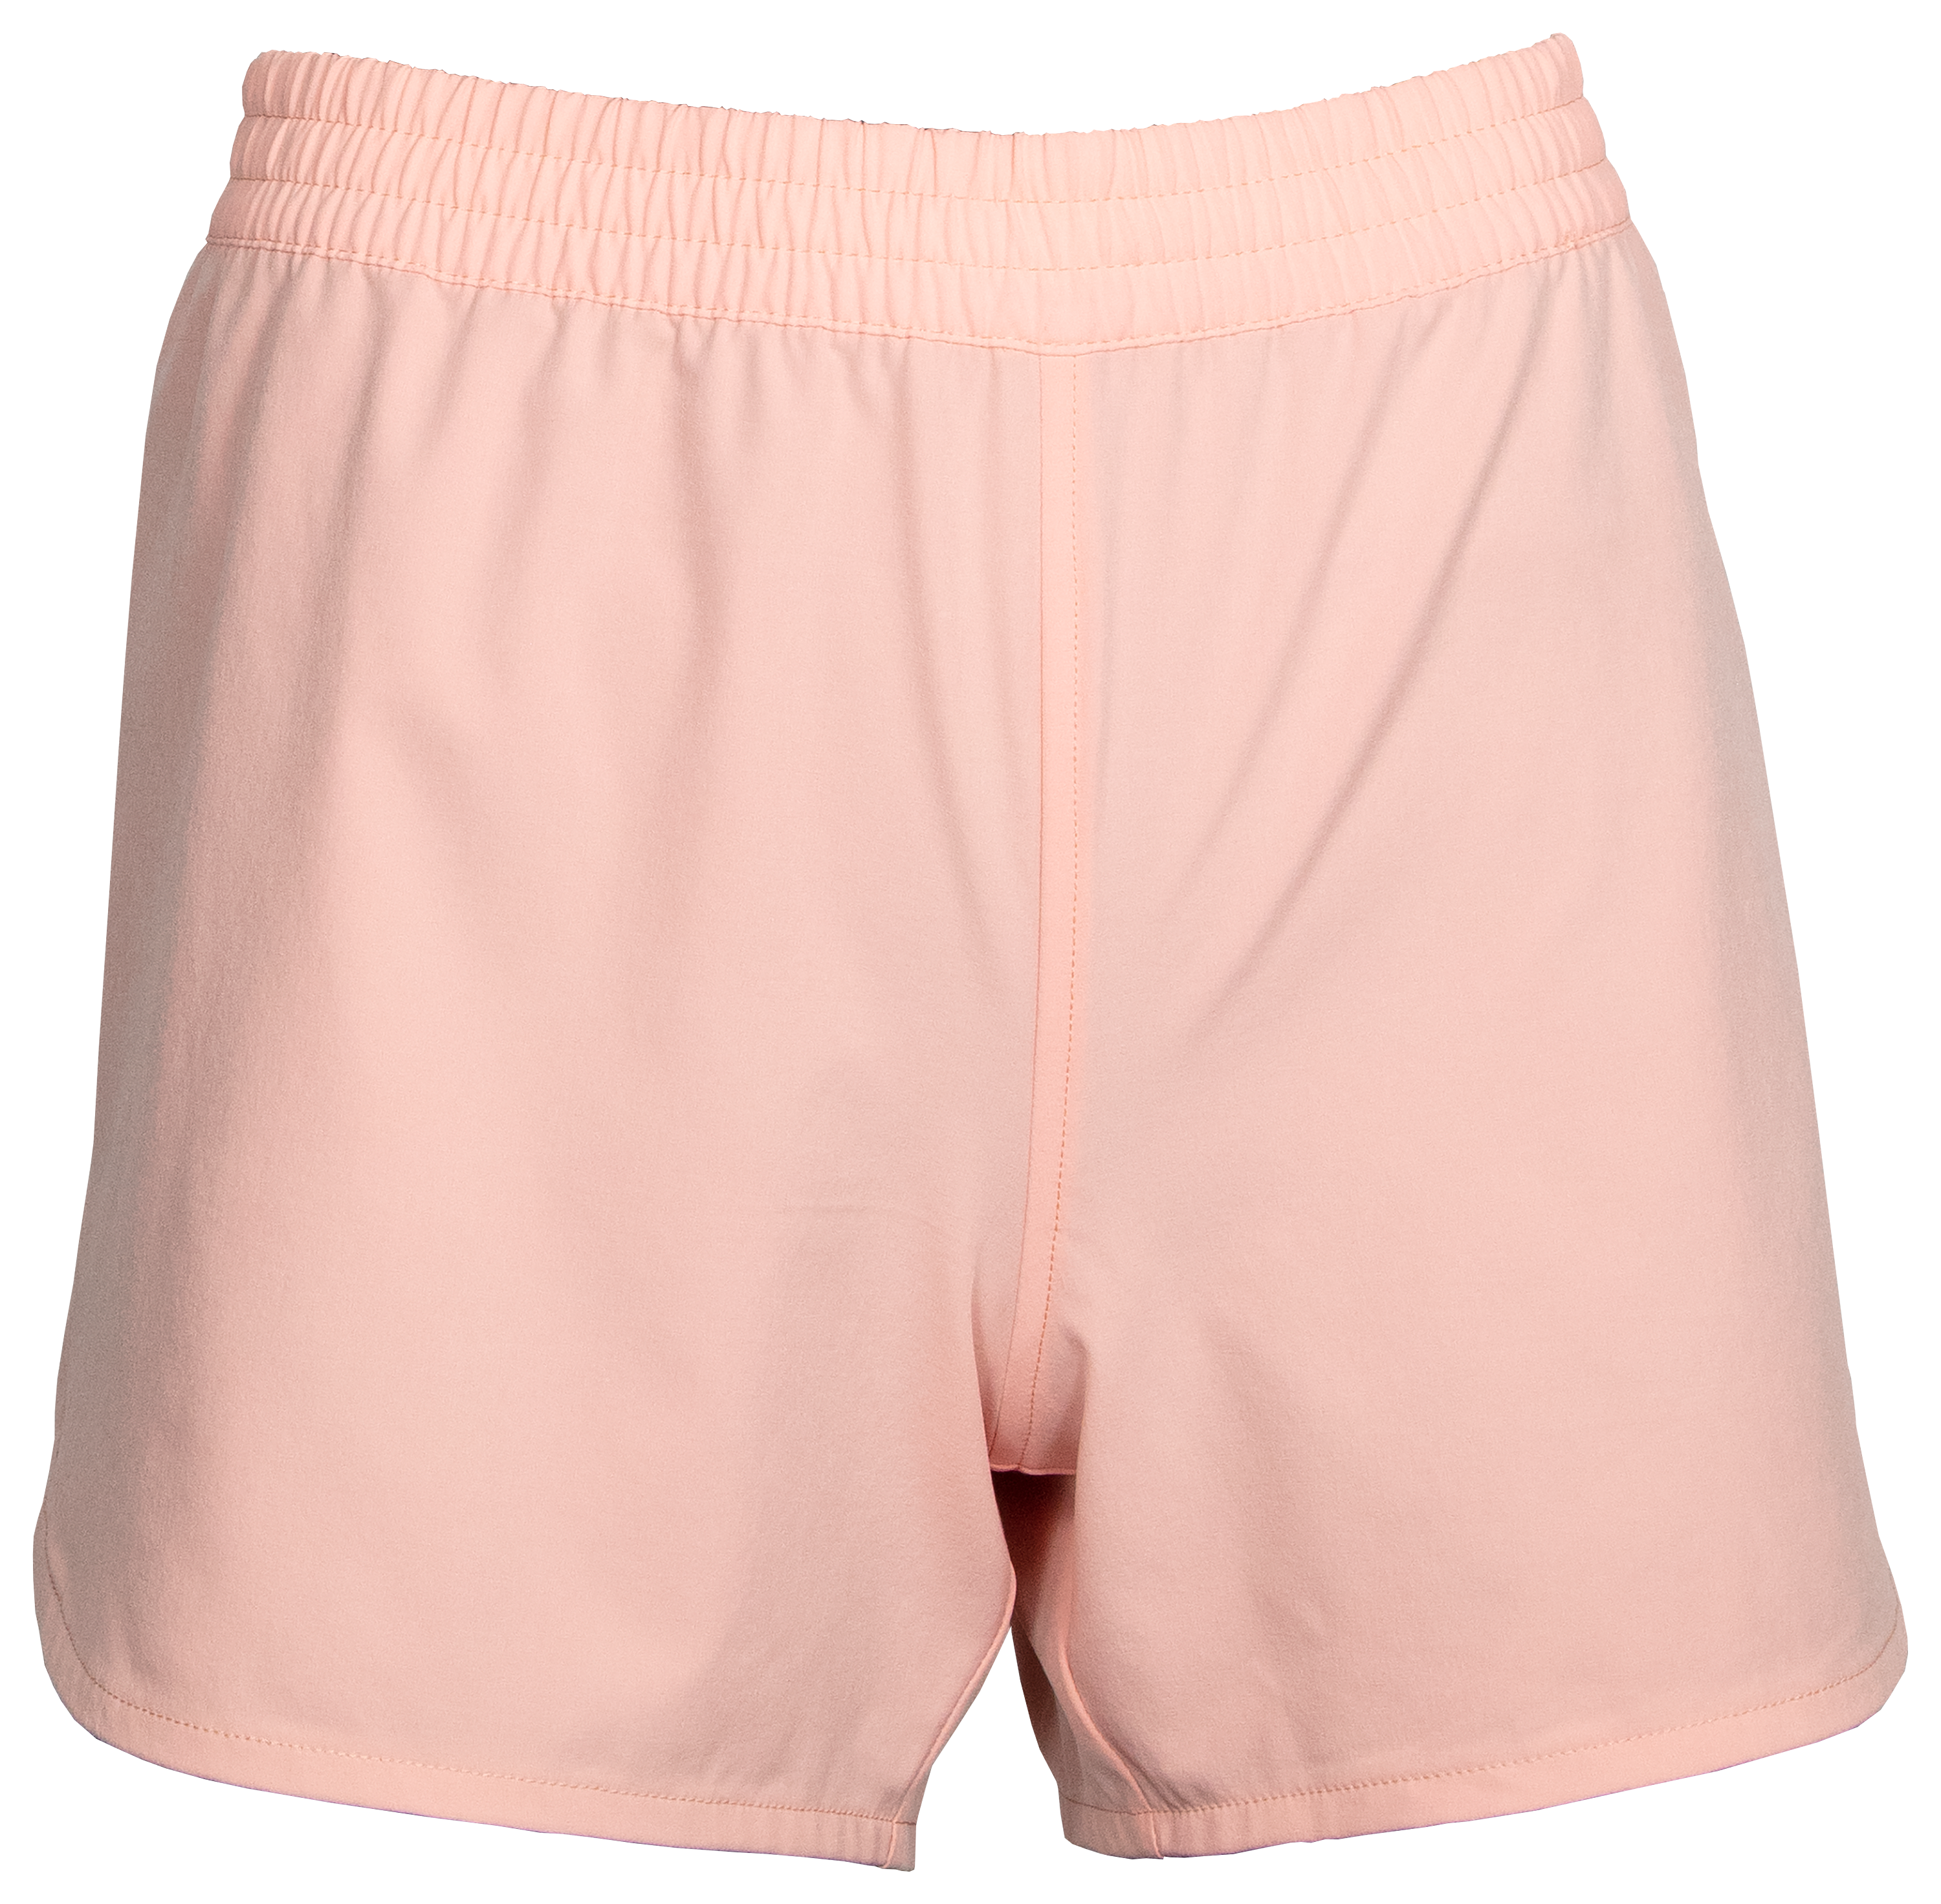 World Wide Sportsman Charter Print Pull-On Shorts for Ladies - Candlelight Peach - L